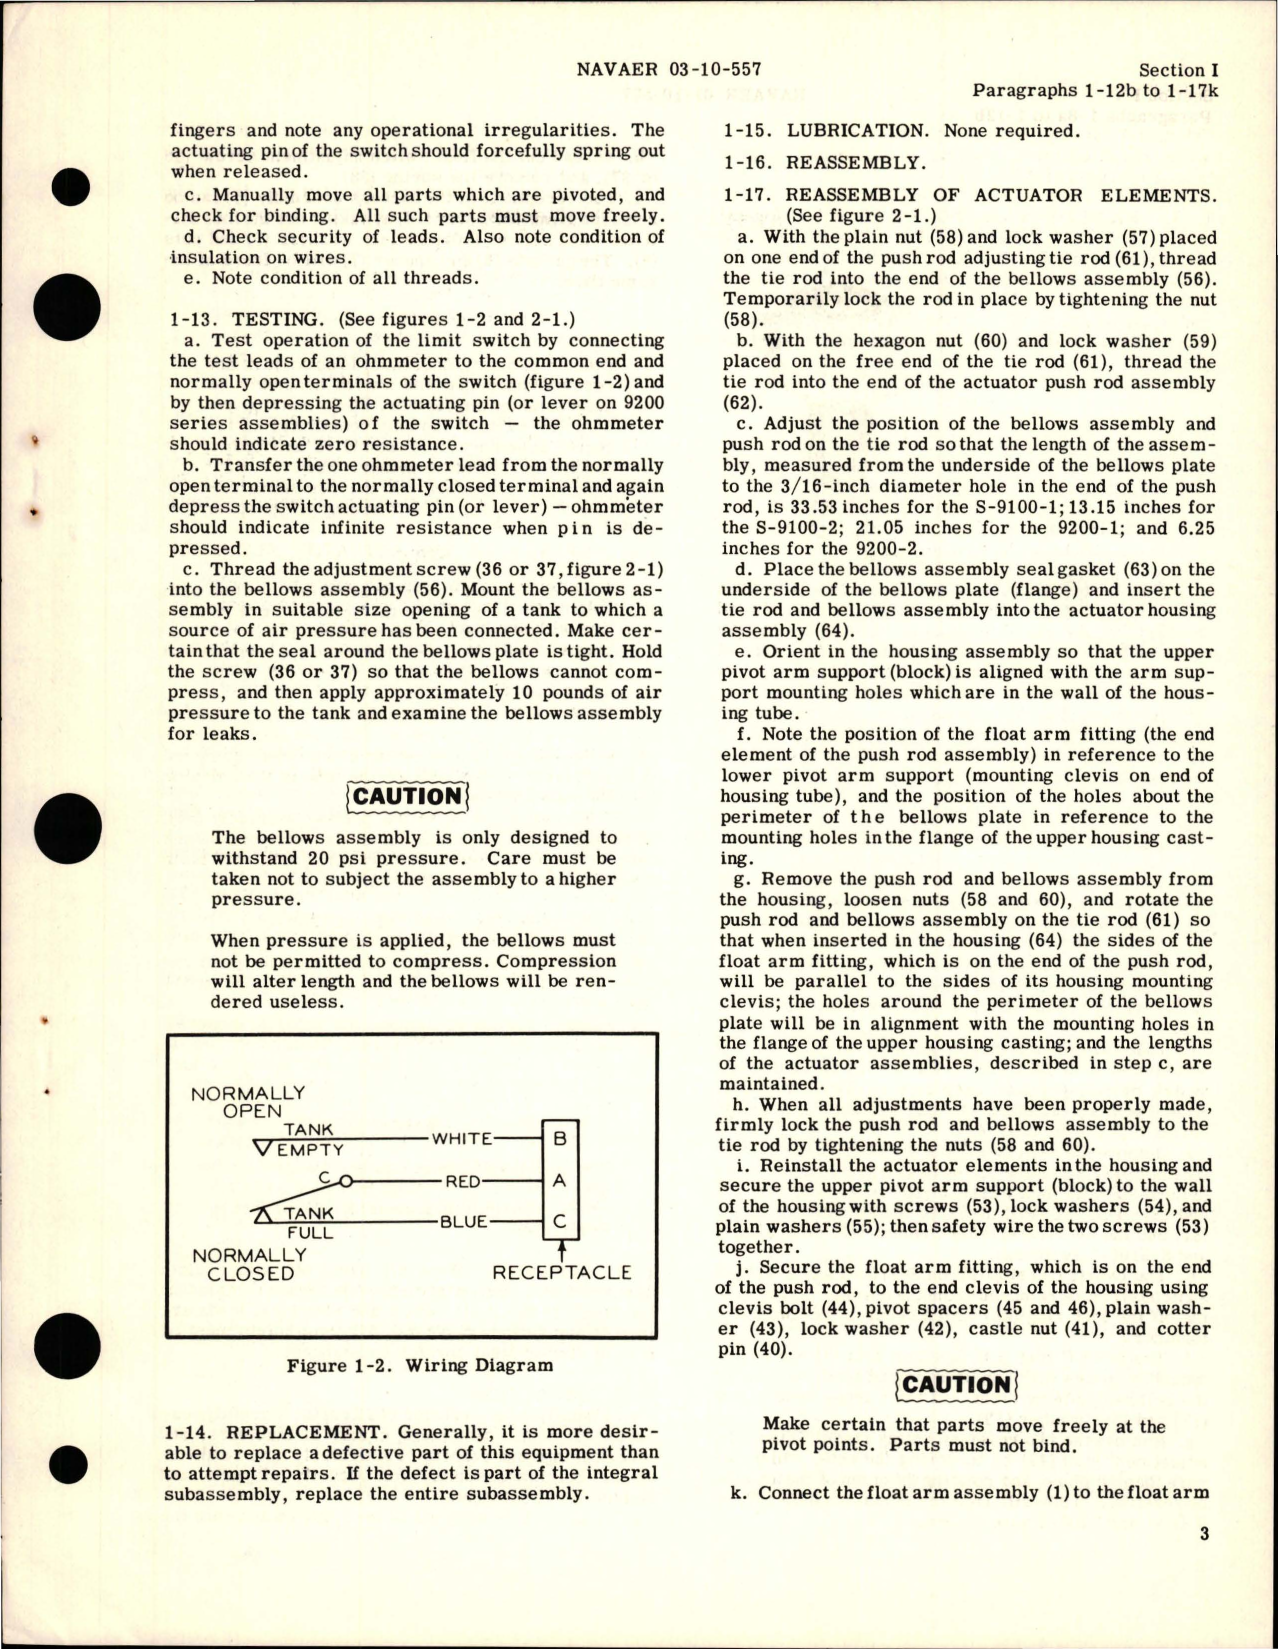 Sample page 5 from AirCorps Library document: Overhaul Instructions with Parts Catalog for Float Arm Type Switch Assembly - Models S-9100-1, S-9100-2, S-9200-1, and S-9200-2 